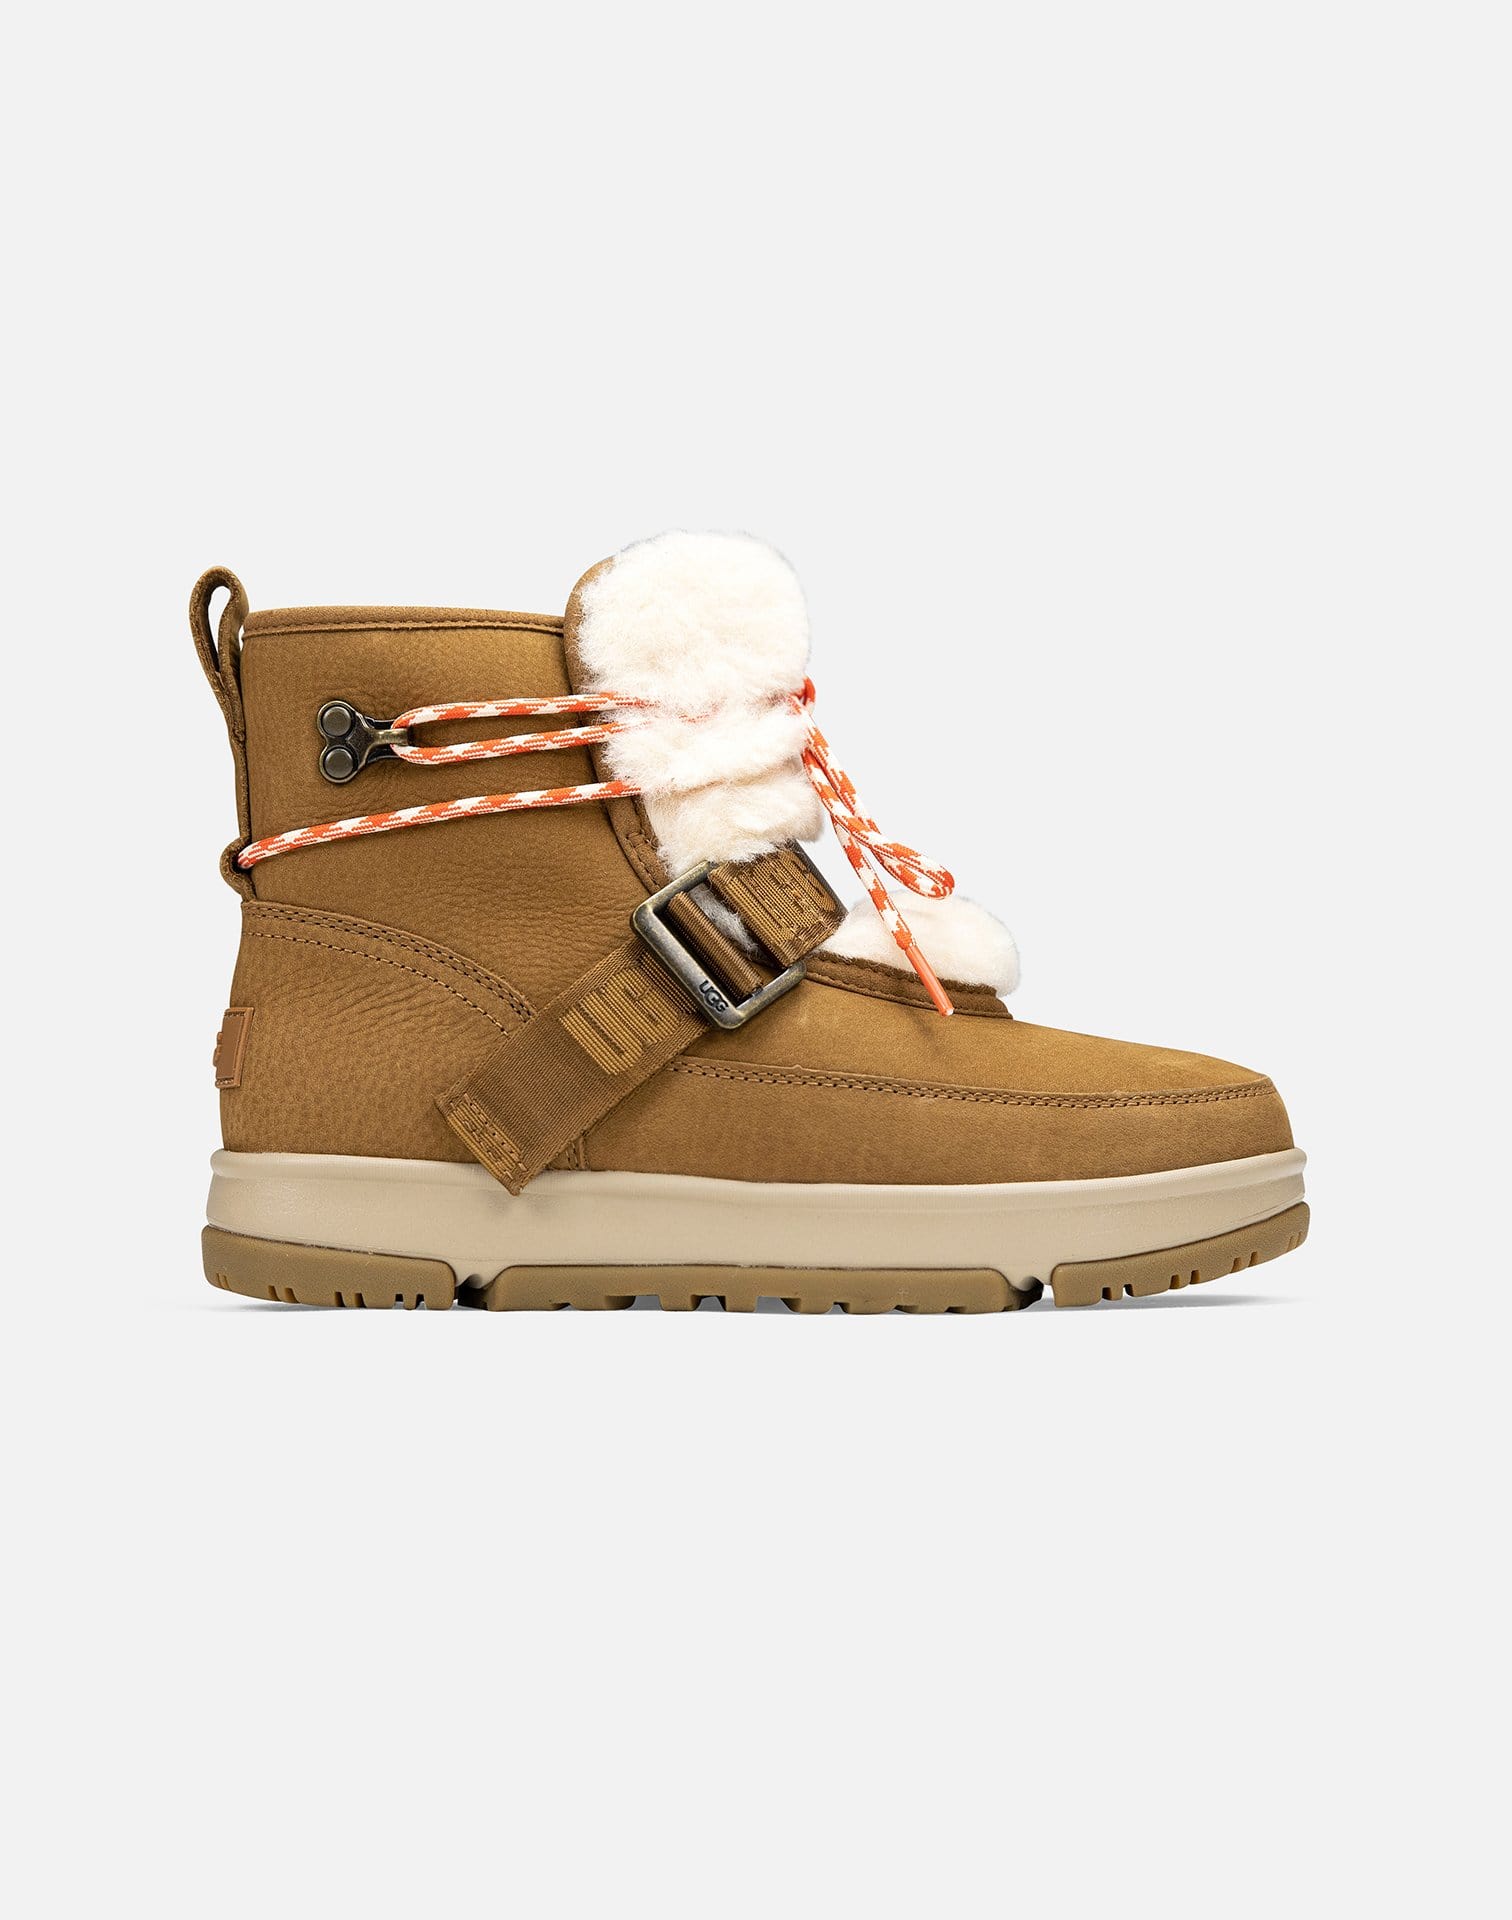 CLASSIC WEATHER HIKER BOOTS – DTLR